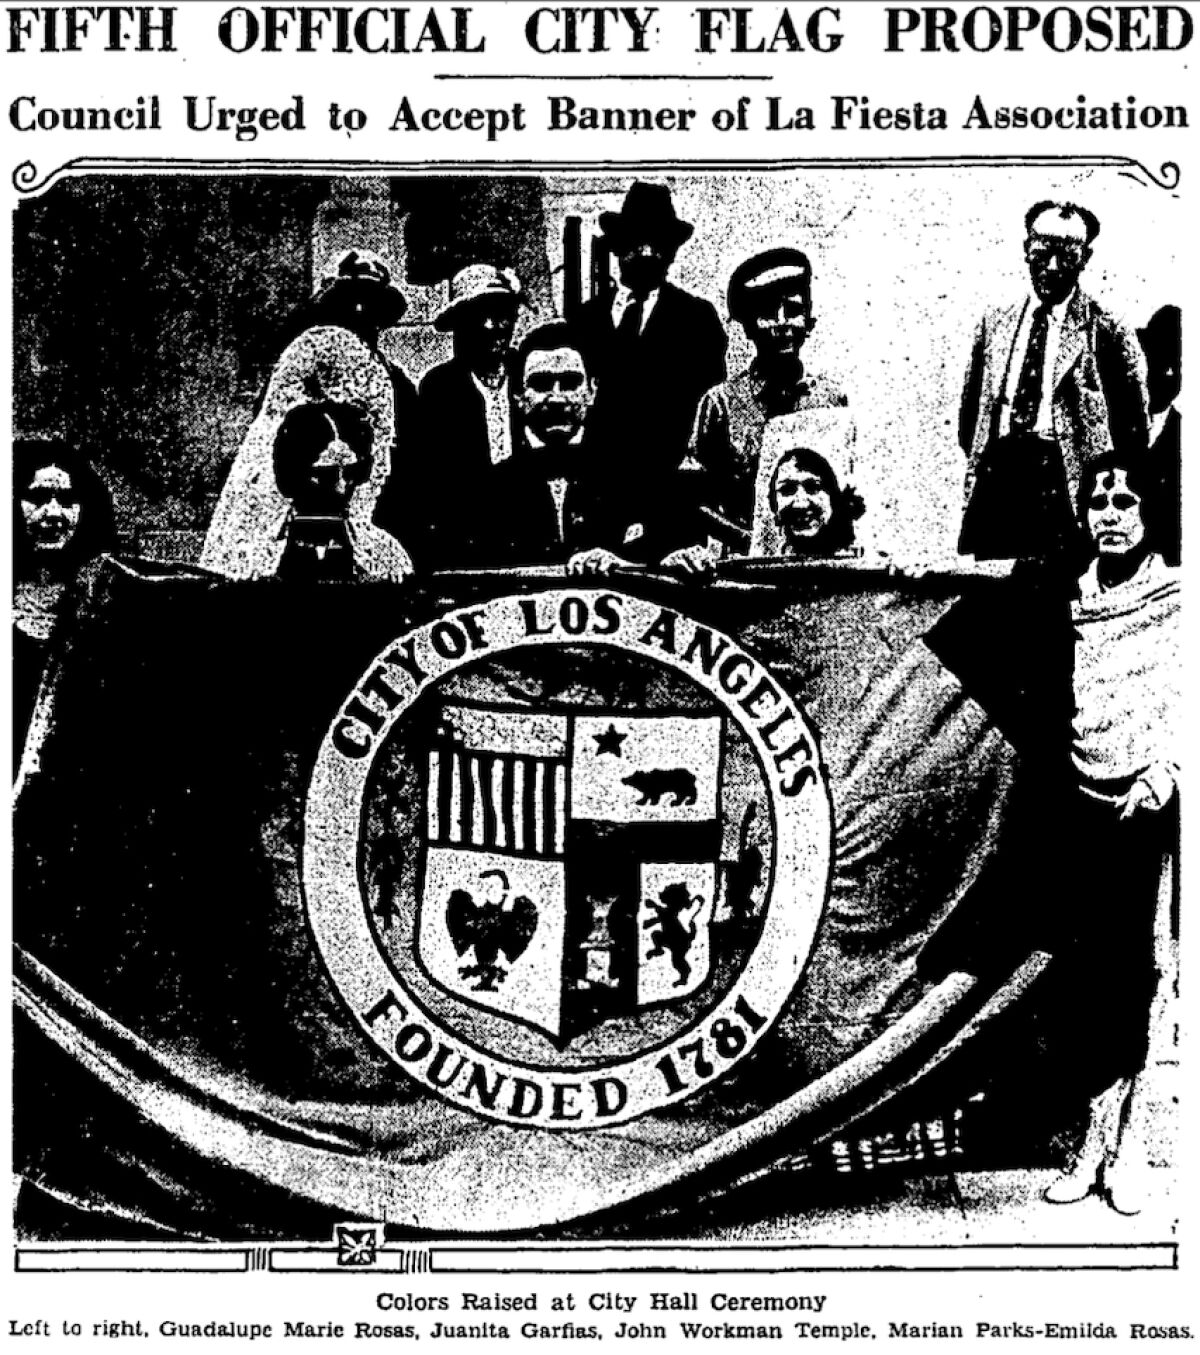 Black and white photo shows people holding the L.A. city flag